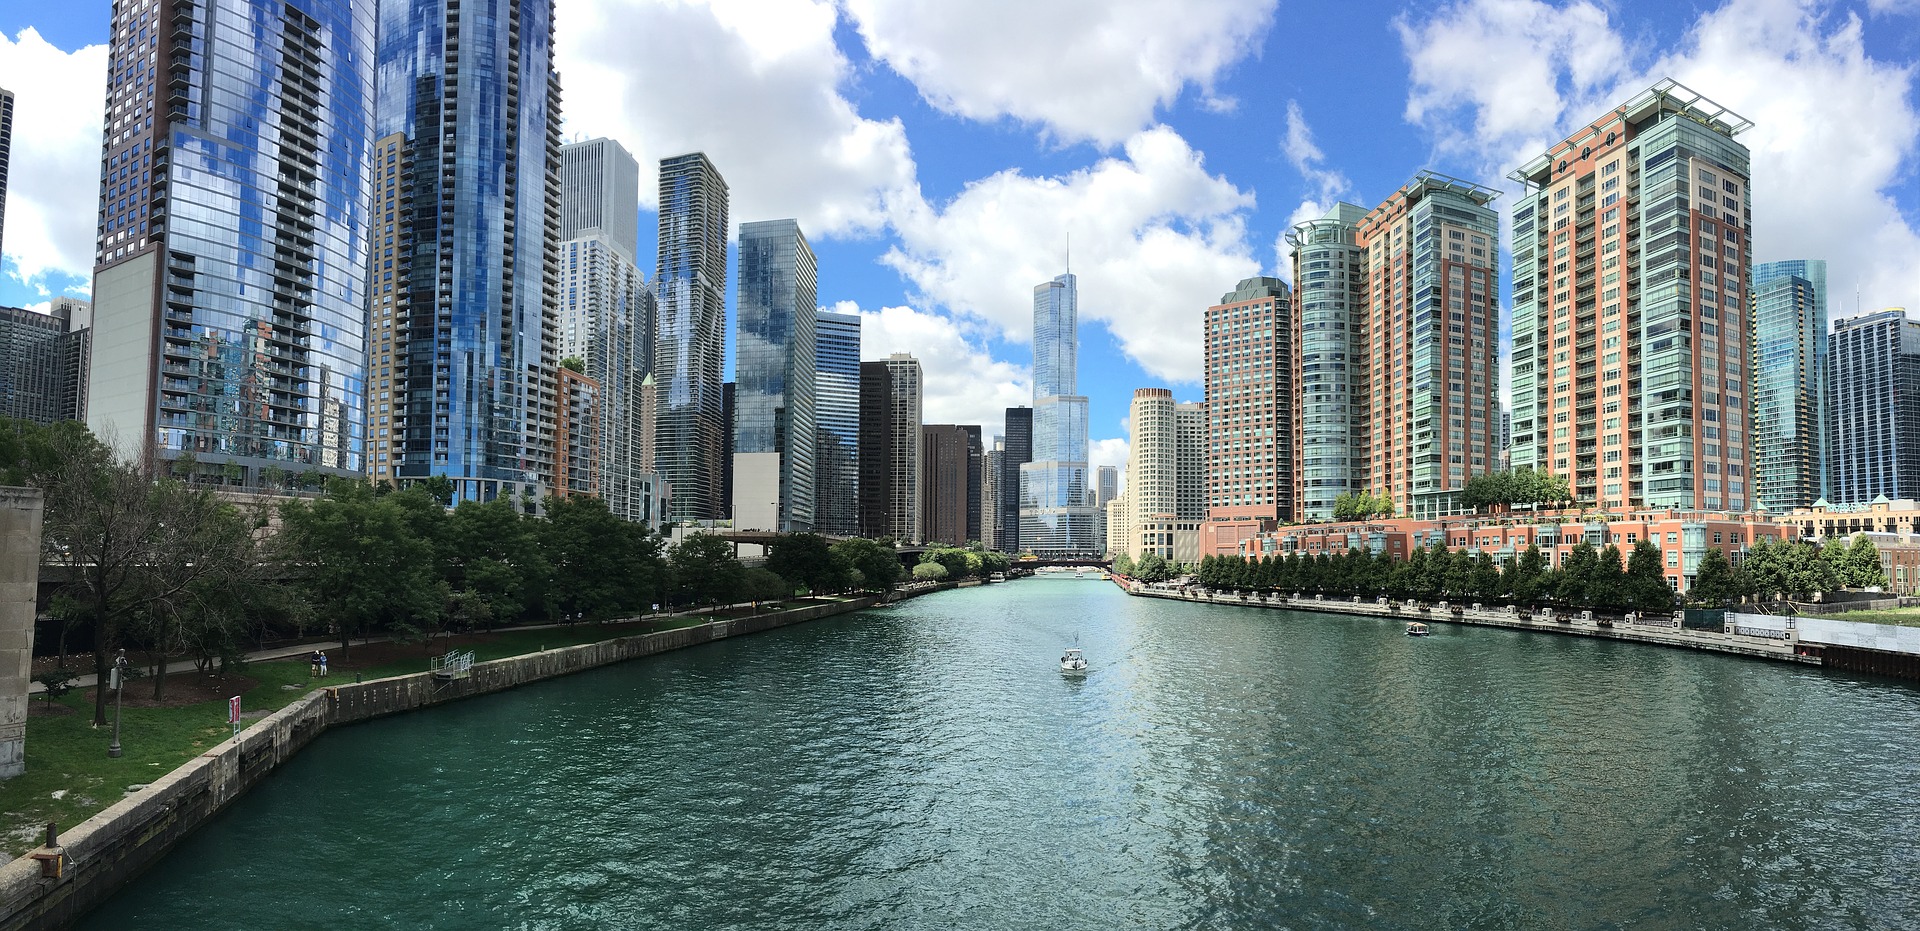 9 Things You Need to Know Before Moving to Chicago